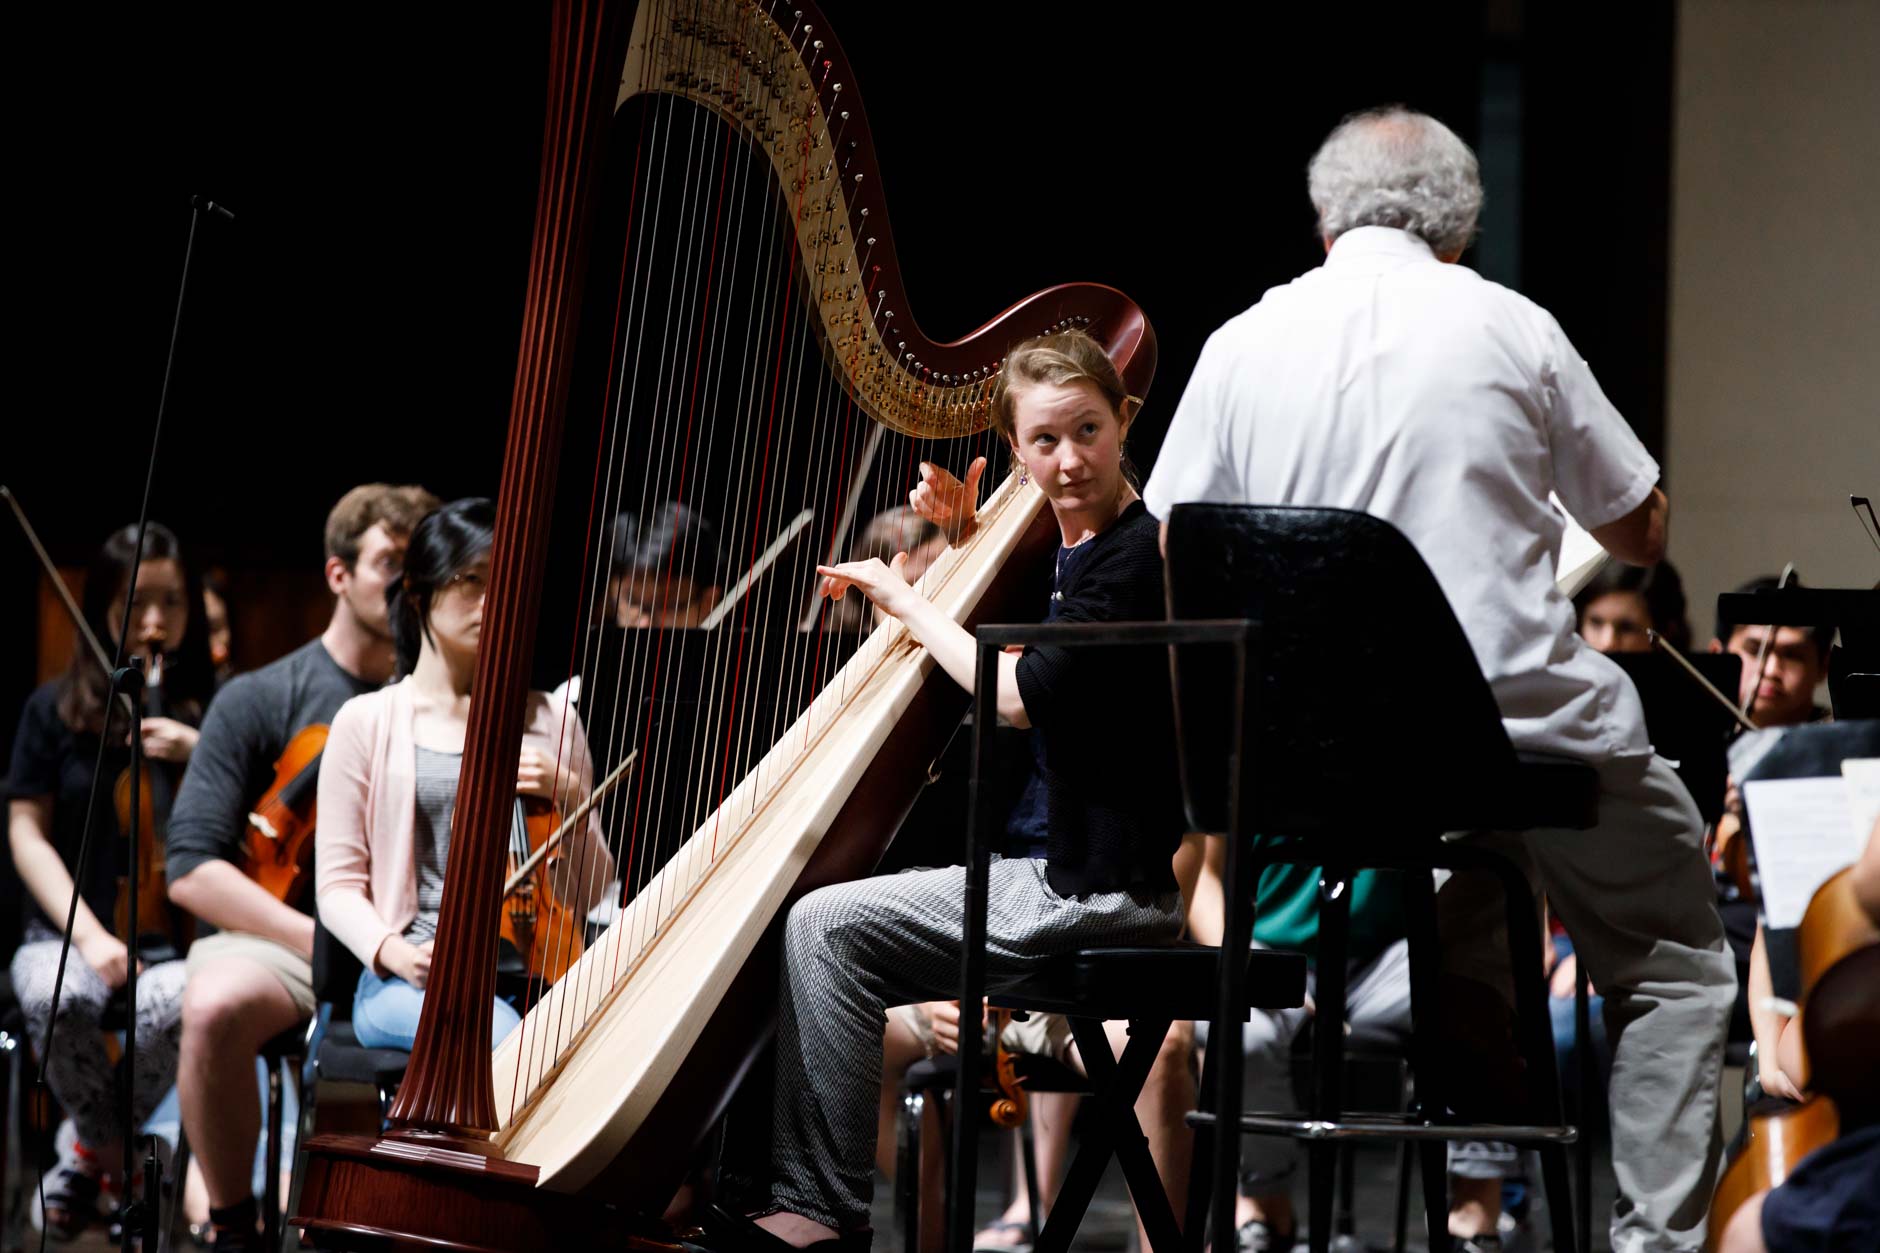 Mathilde Wauters from Belgium speaks with conductor Arthur Fagen during an orchestra rehearsal for the Final Stage concert at the 11th USA International Harp Competition at Indiana University in Bloomington, Indiana on Friday, July 12, 2019. (Photo by James Brosher)